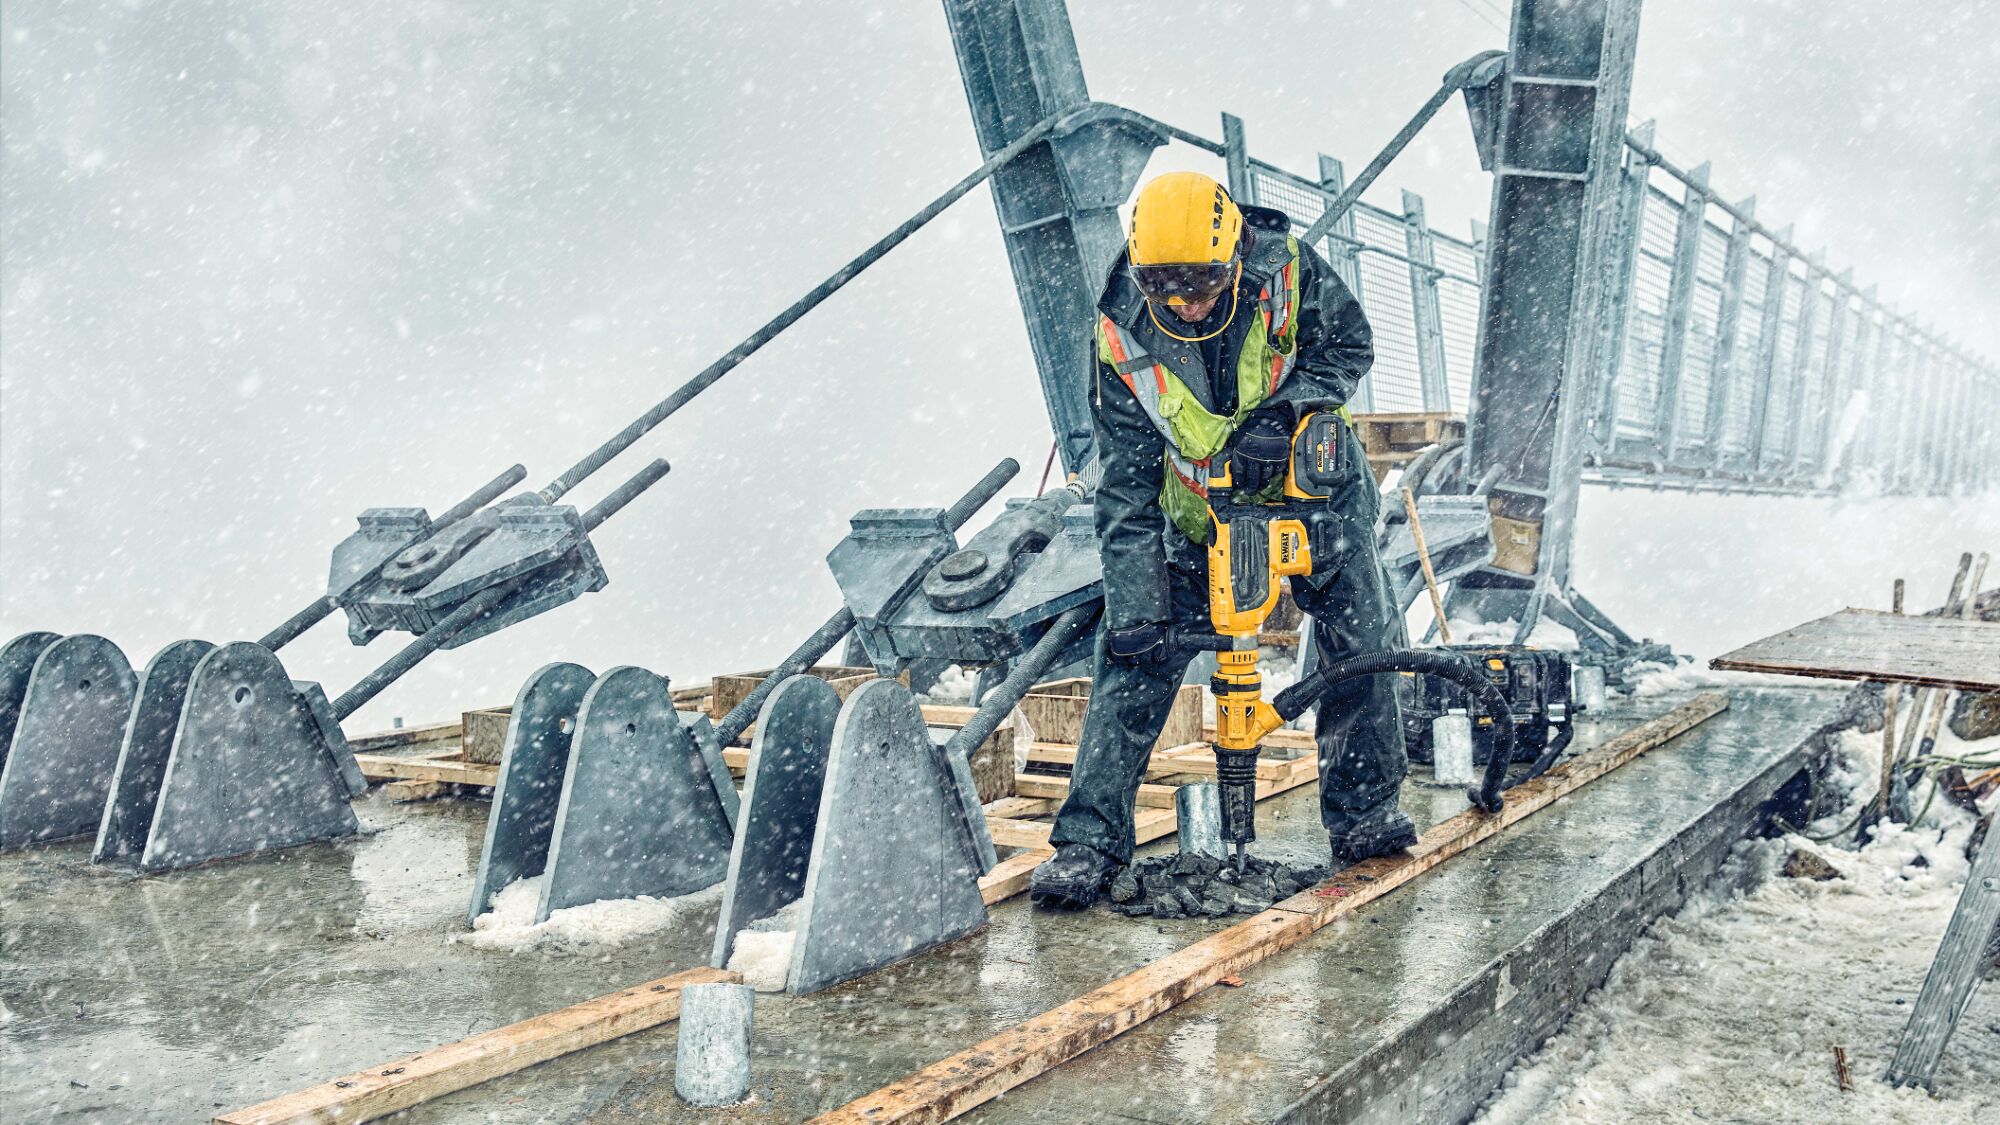 Brushless, cordless SDS MAX combination rotary hammer being used by a person in extreme conditions